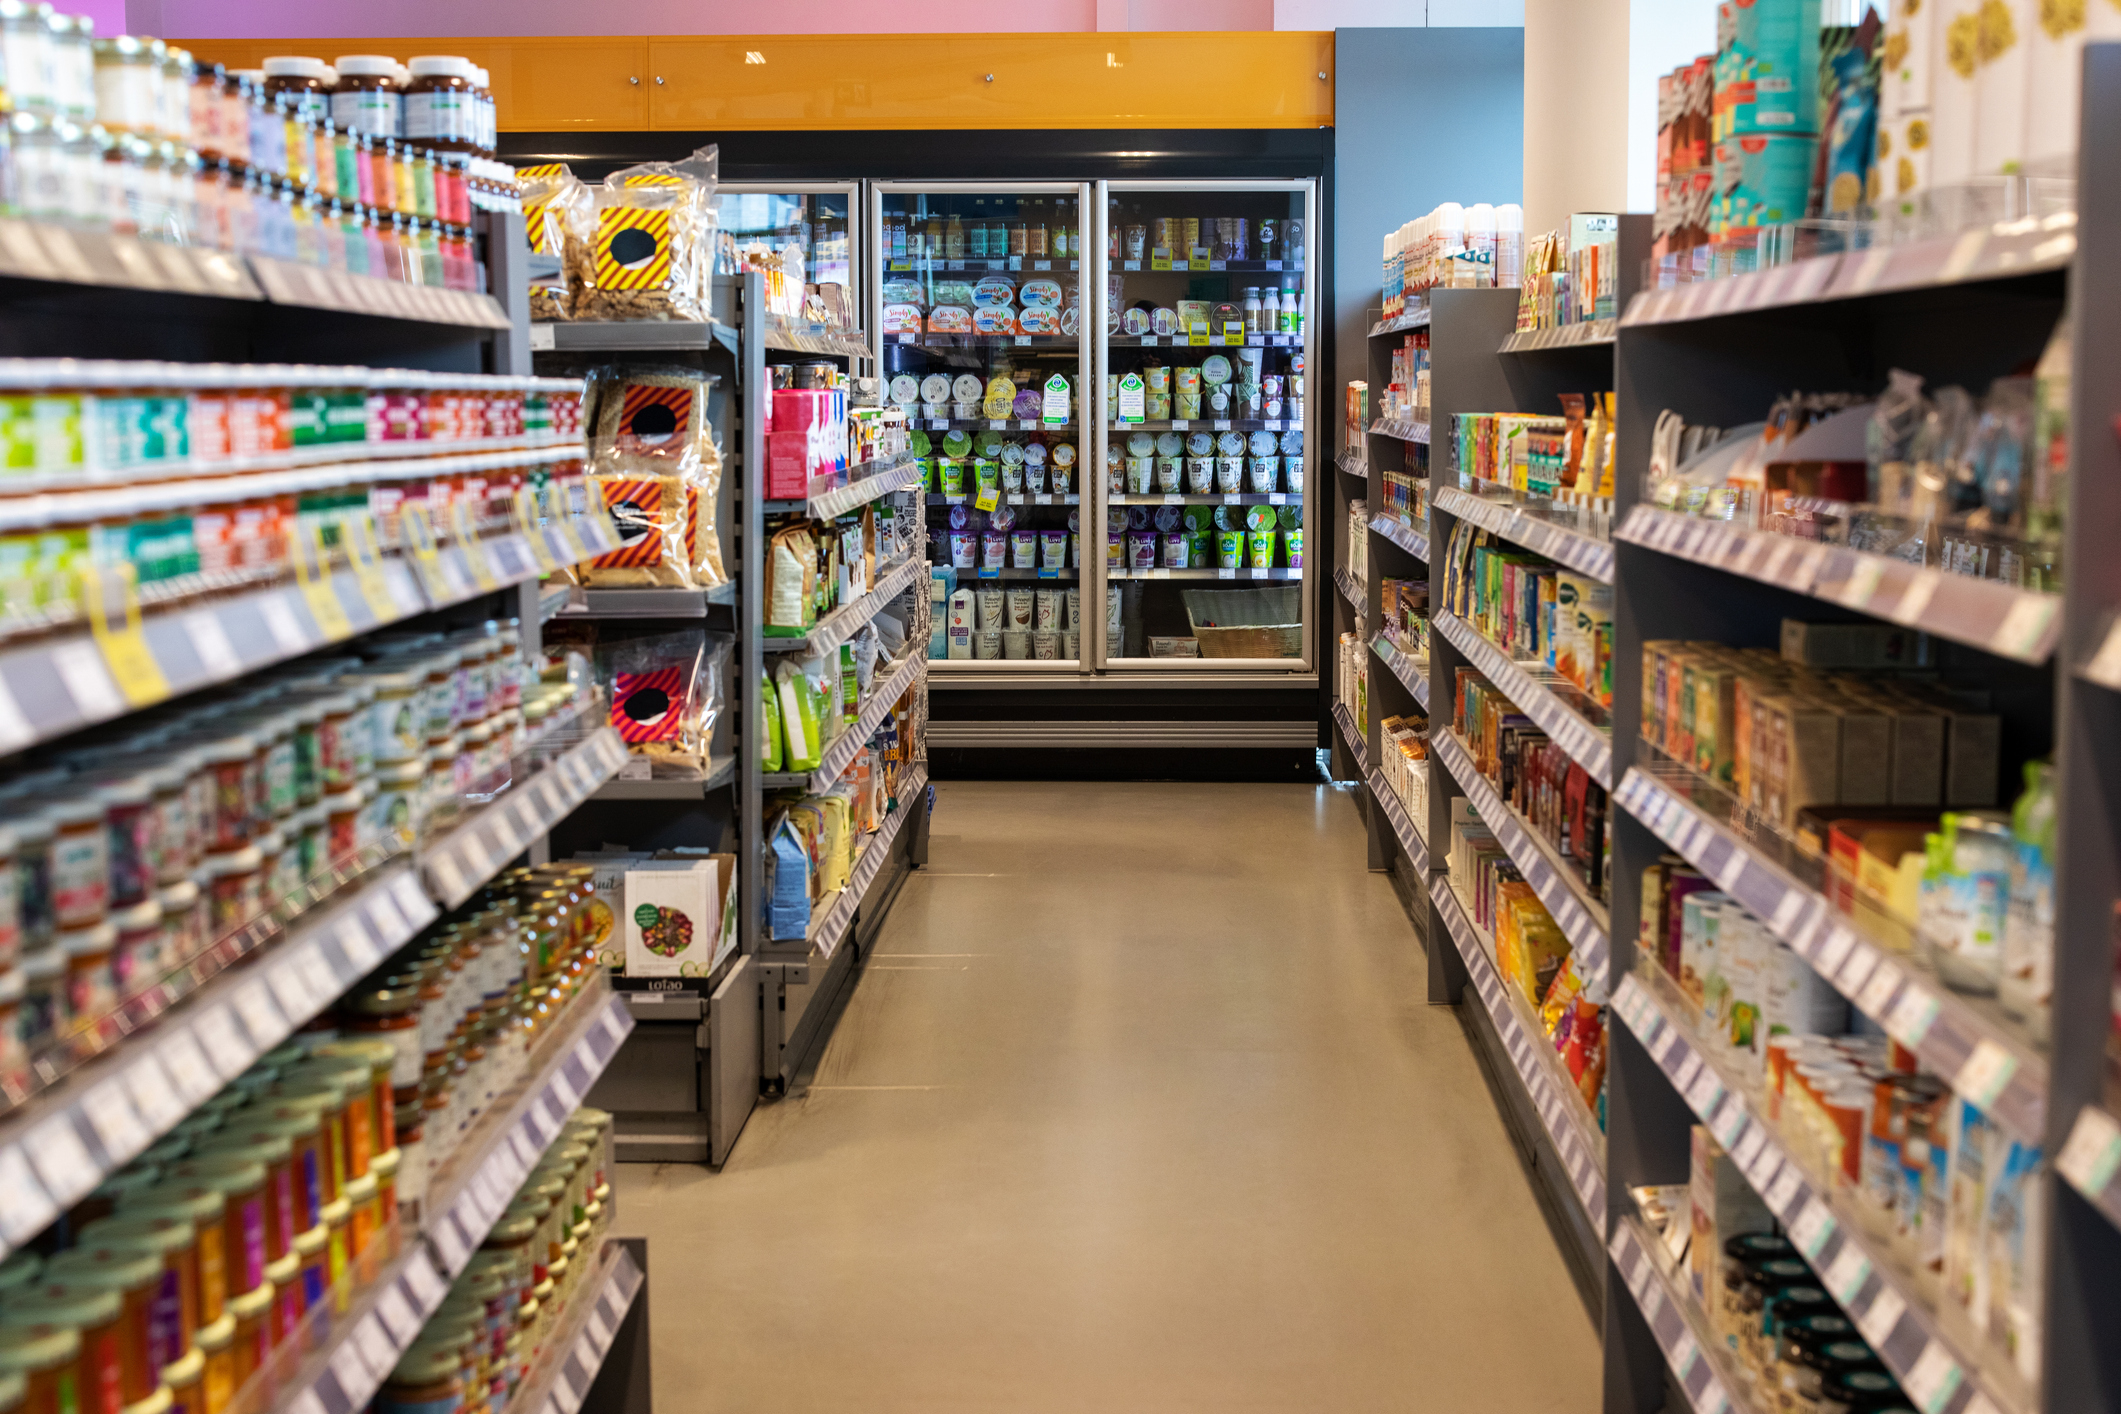 Grocery store aisle with various products on shelves leading to refrigerated section